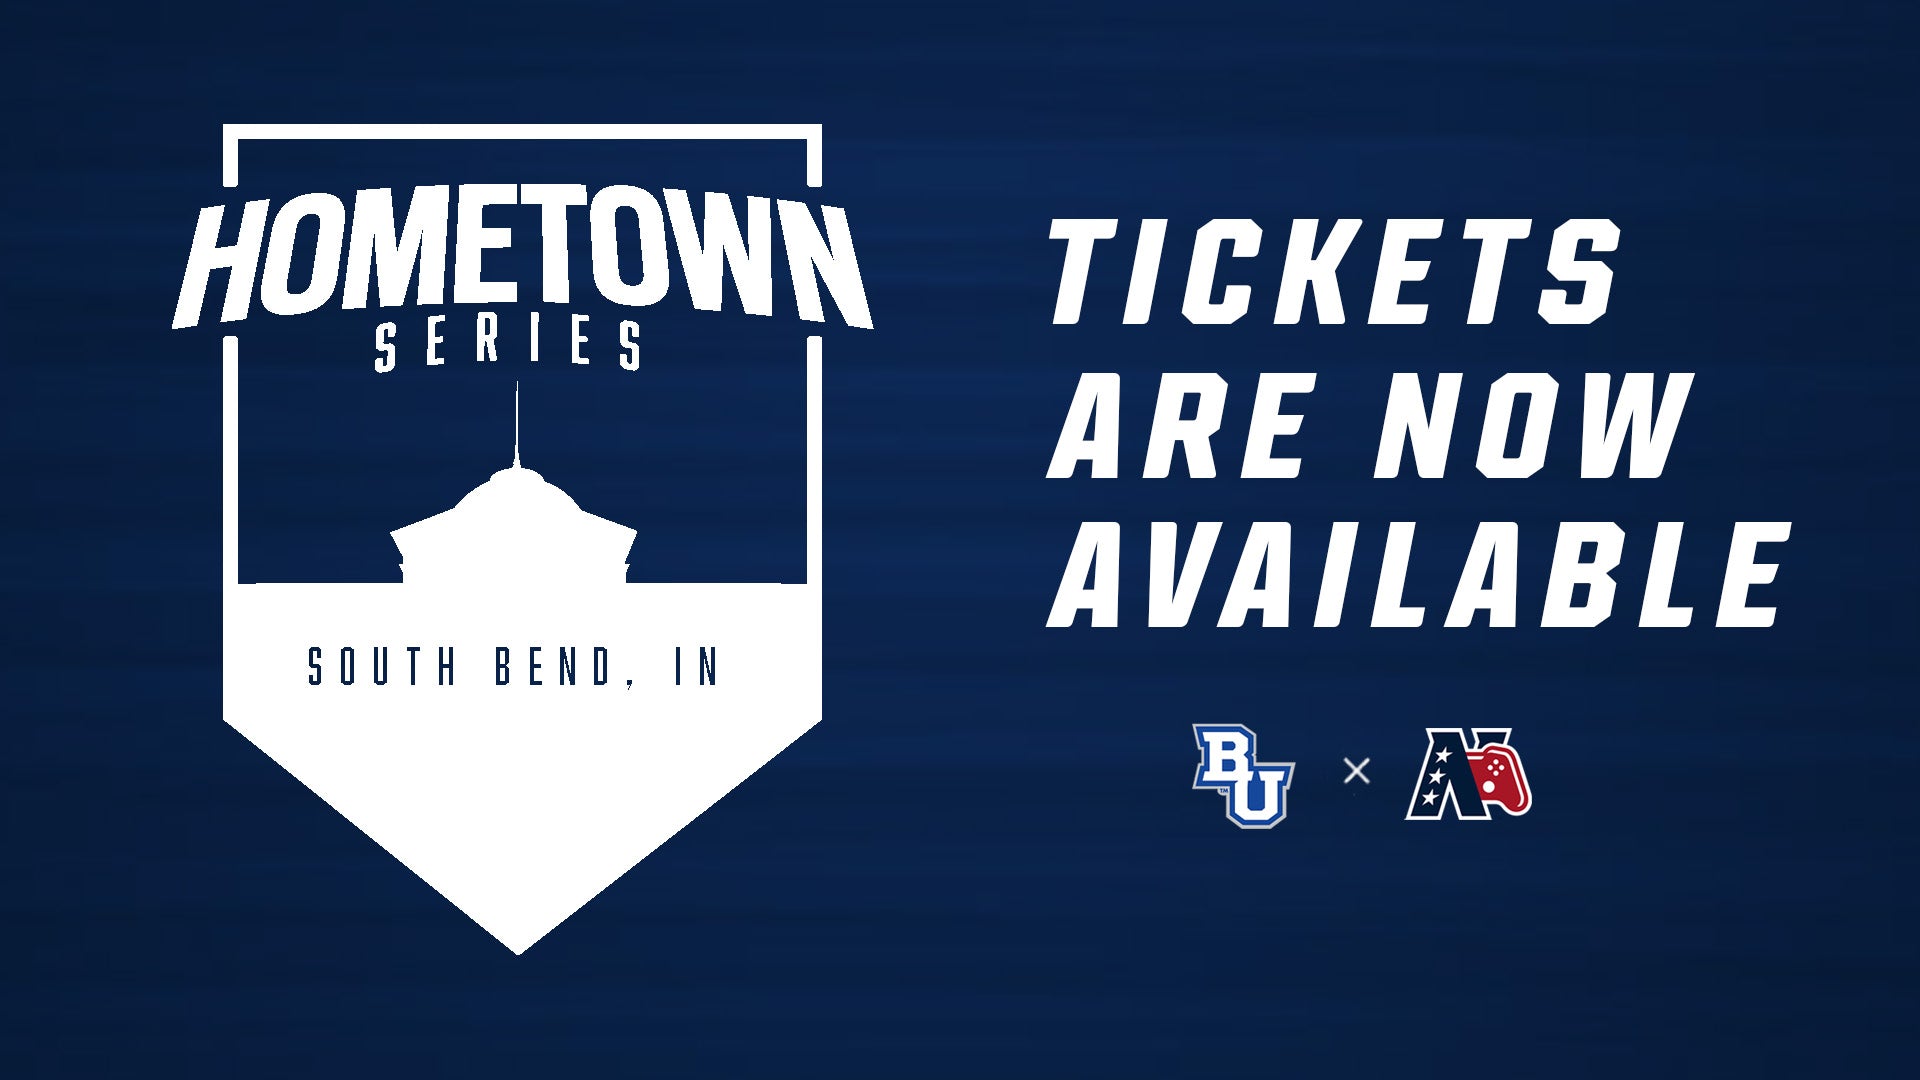 Tickets Now Available for Bethel University and NECC's Hometown Series LAN Event in South Bend, Indiana